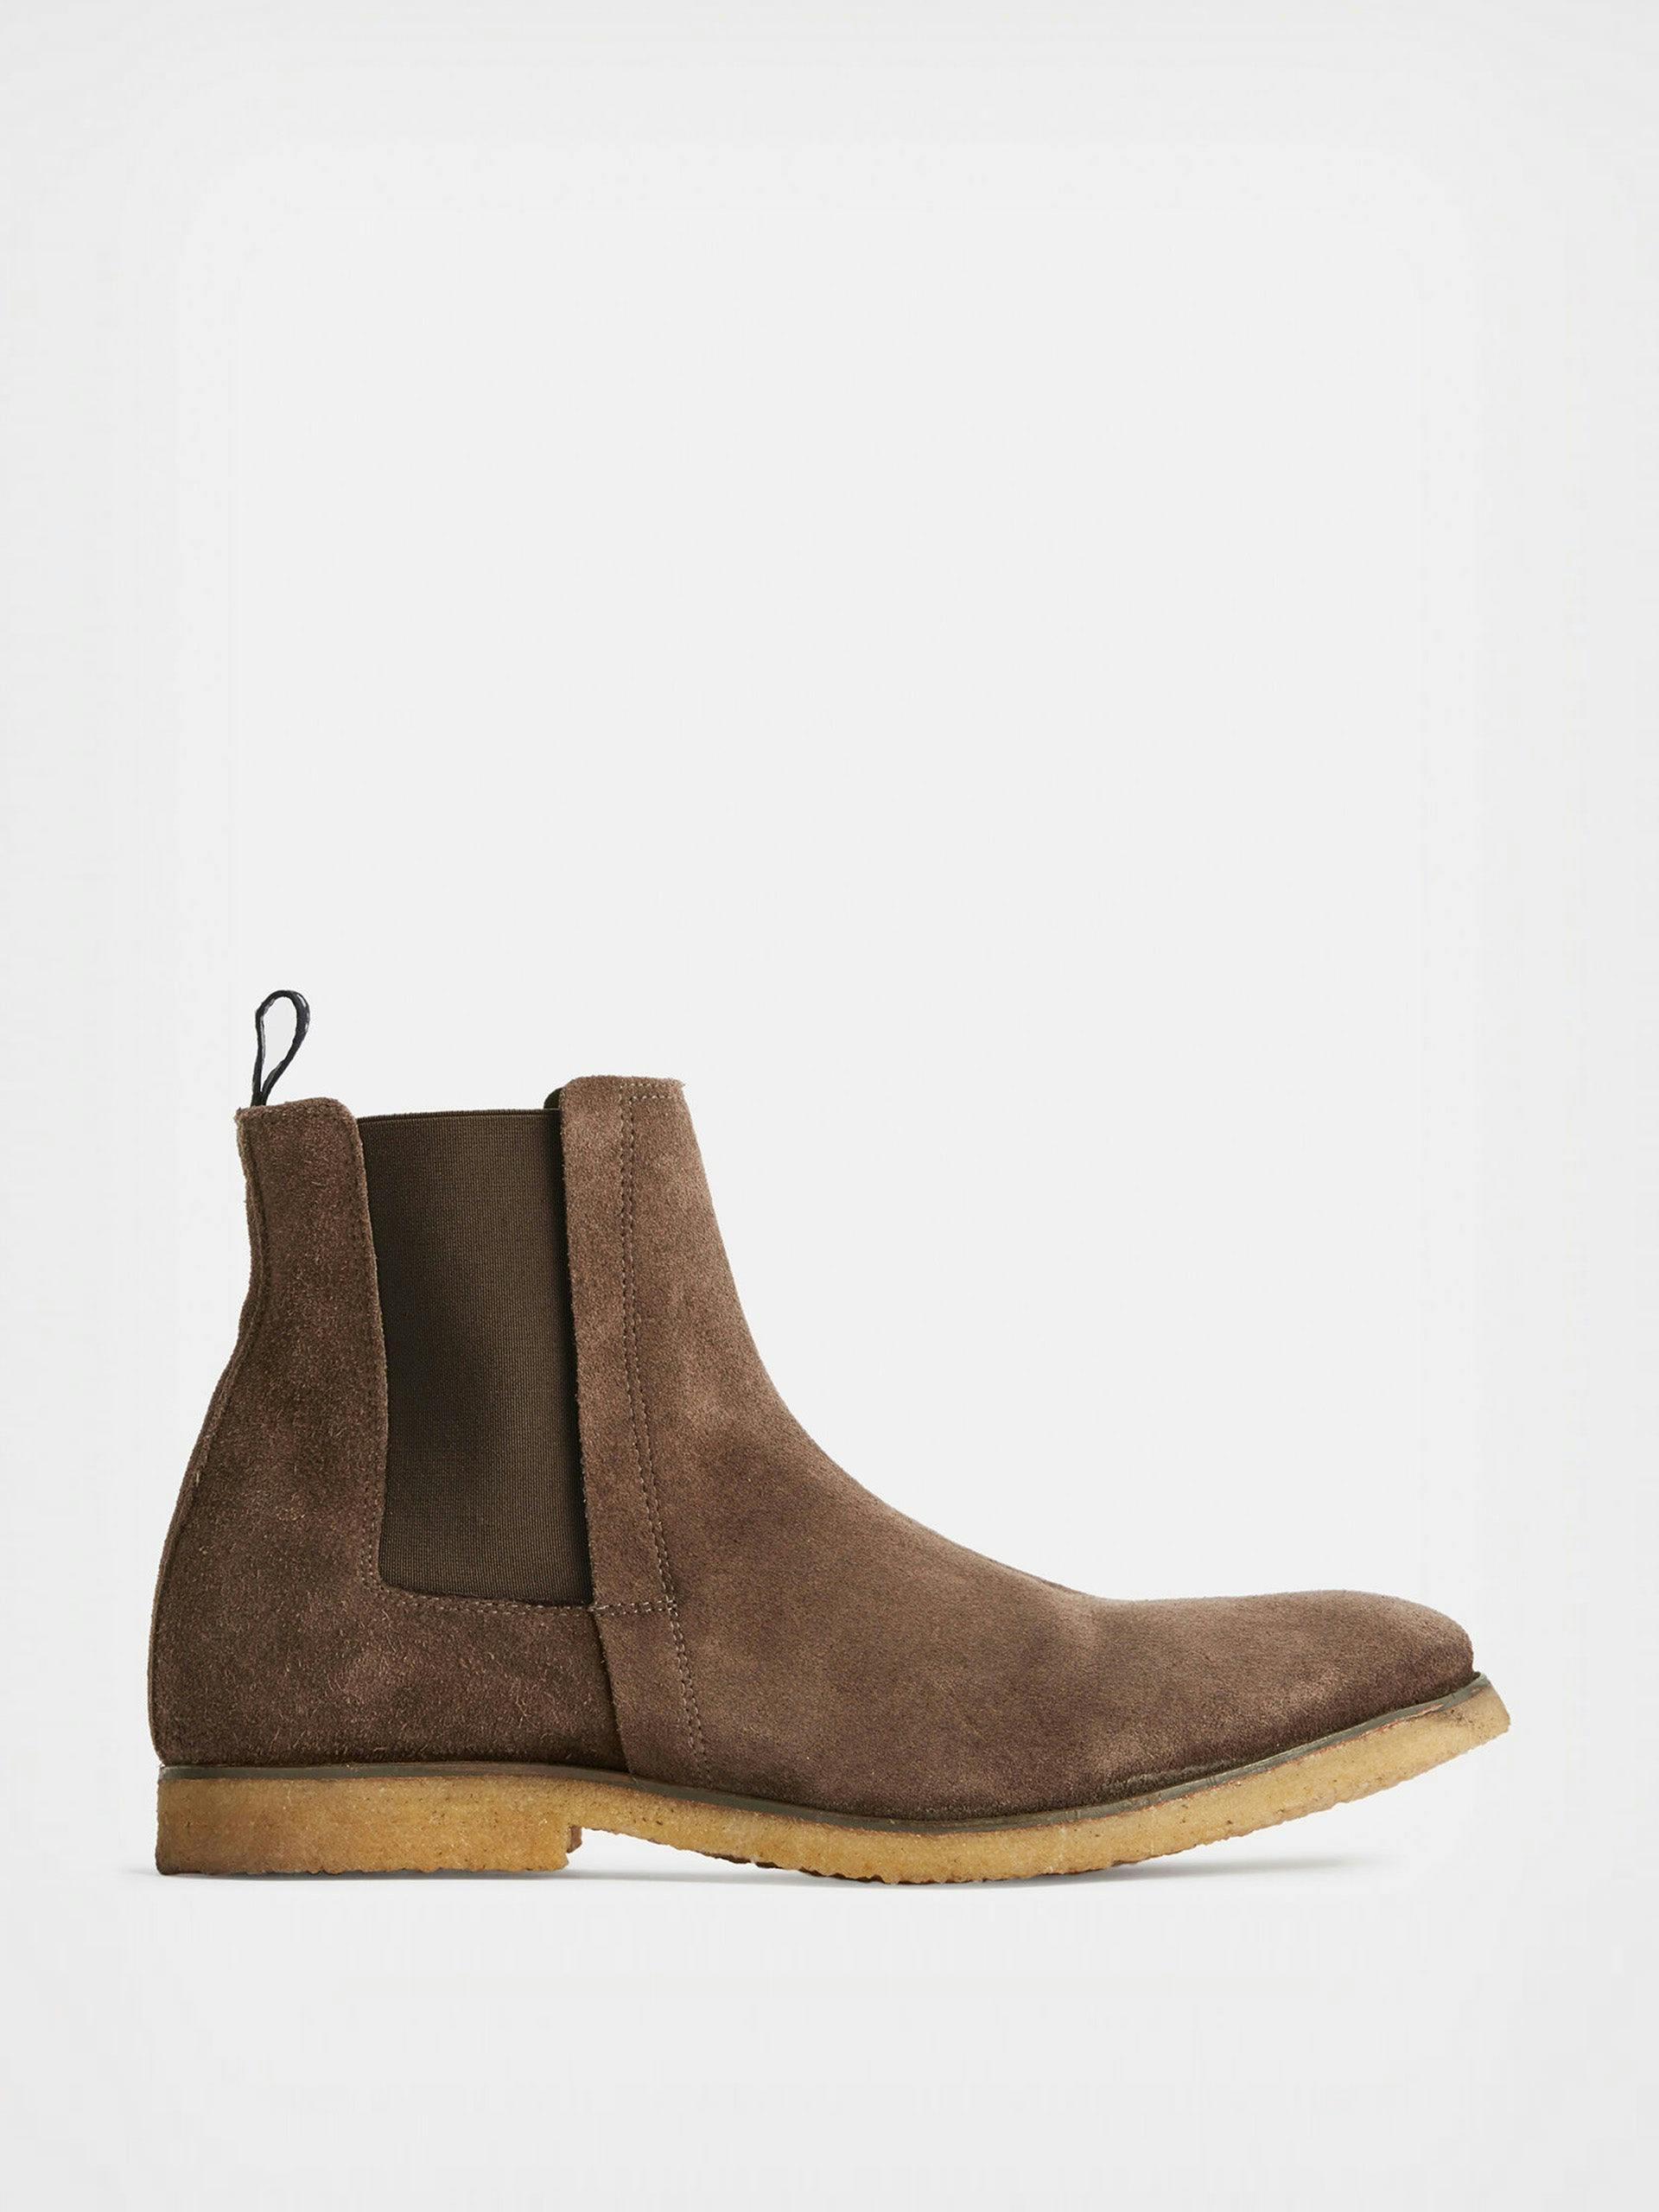 Taupe suede boots